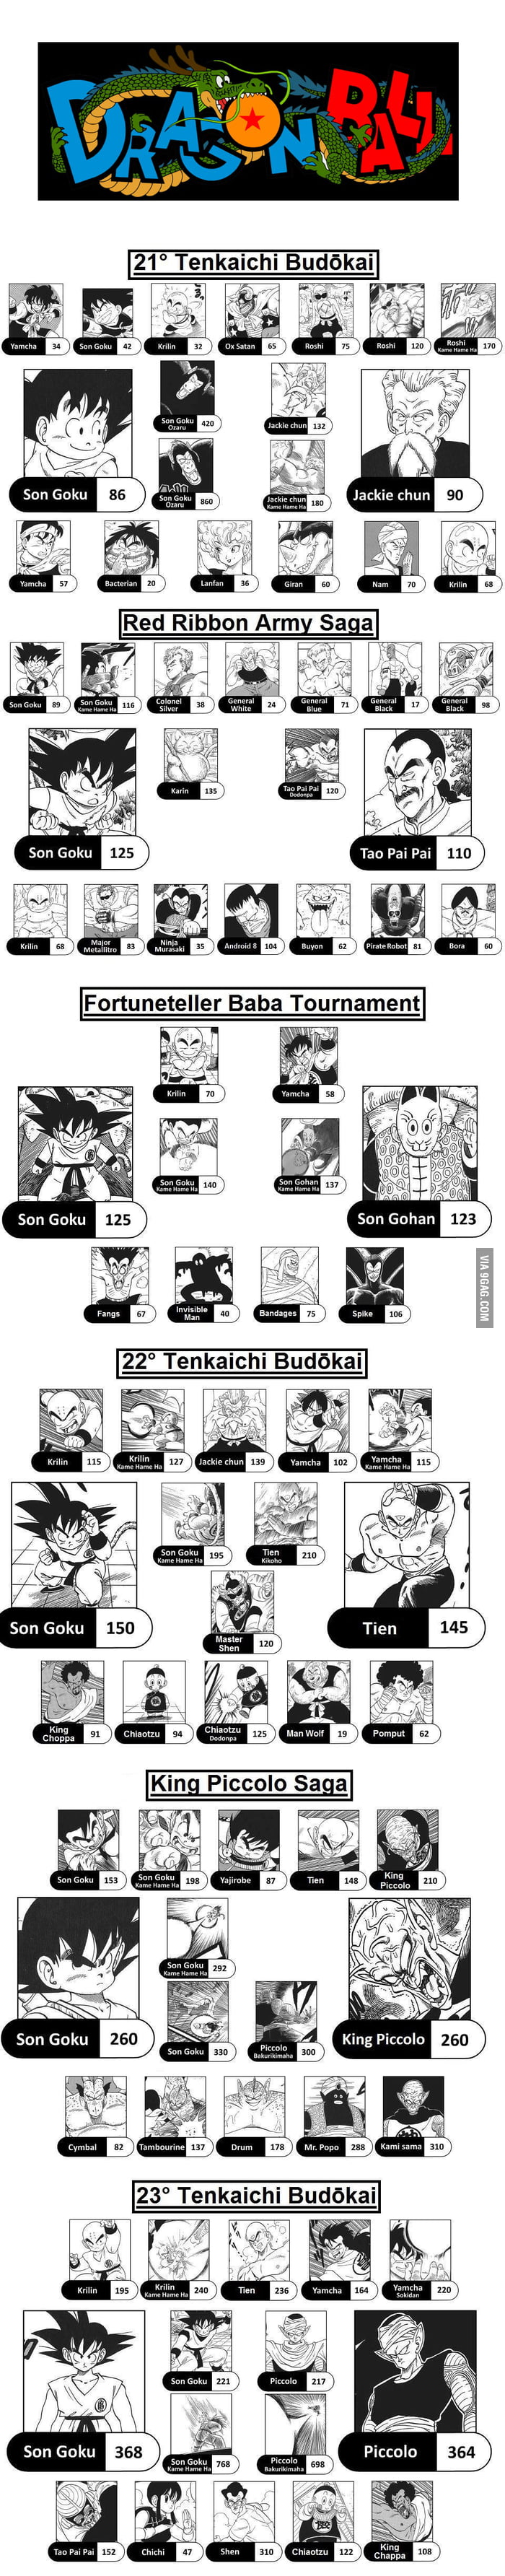 DRAGON BALL - Characters power level (Part I) - 9GAG